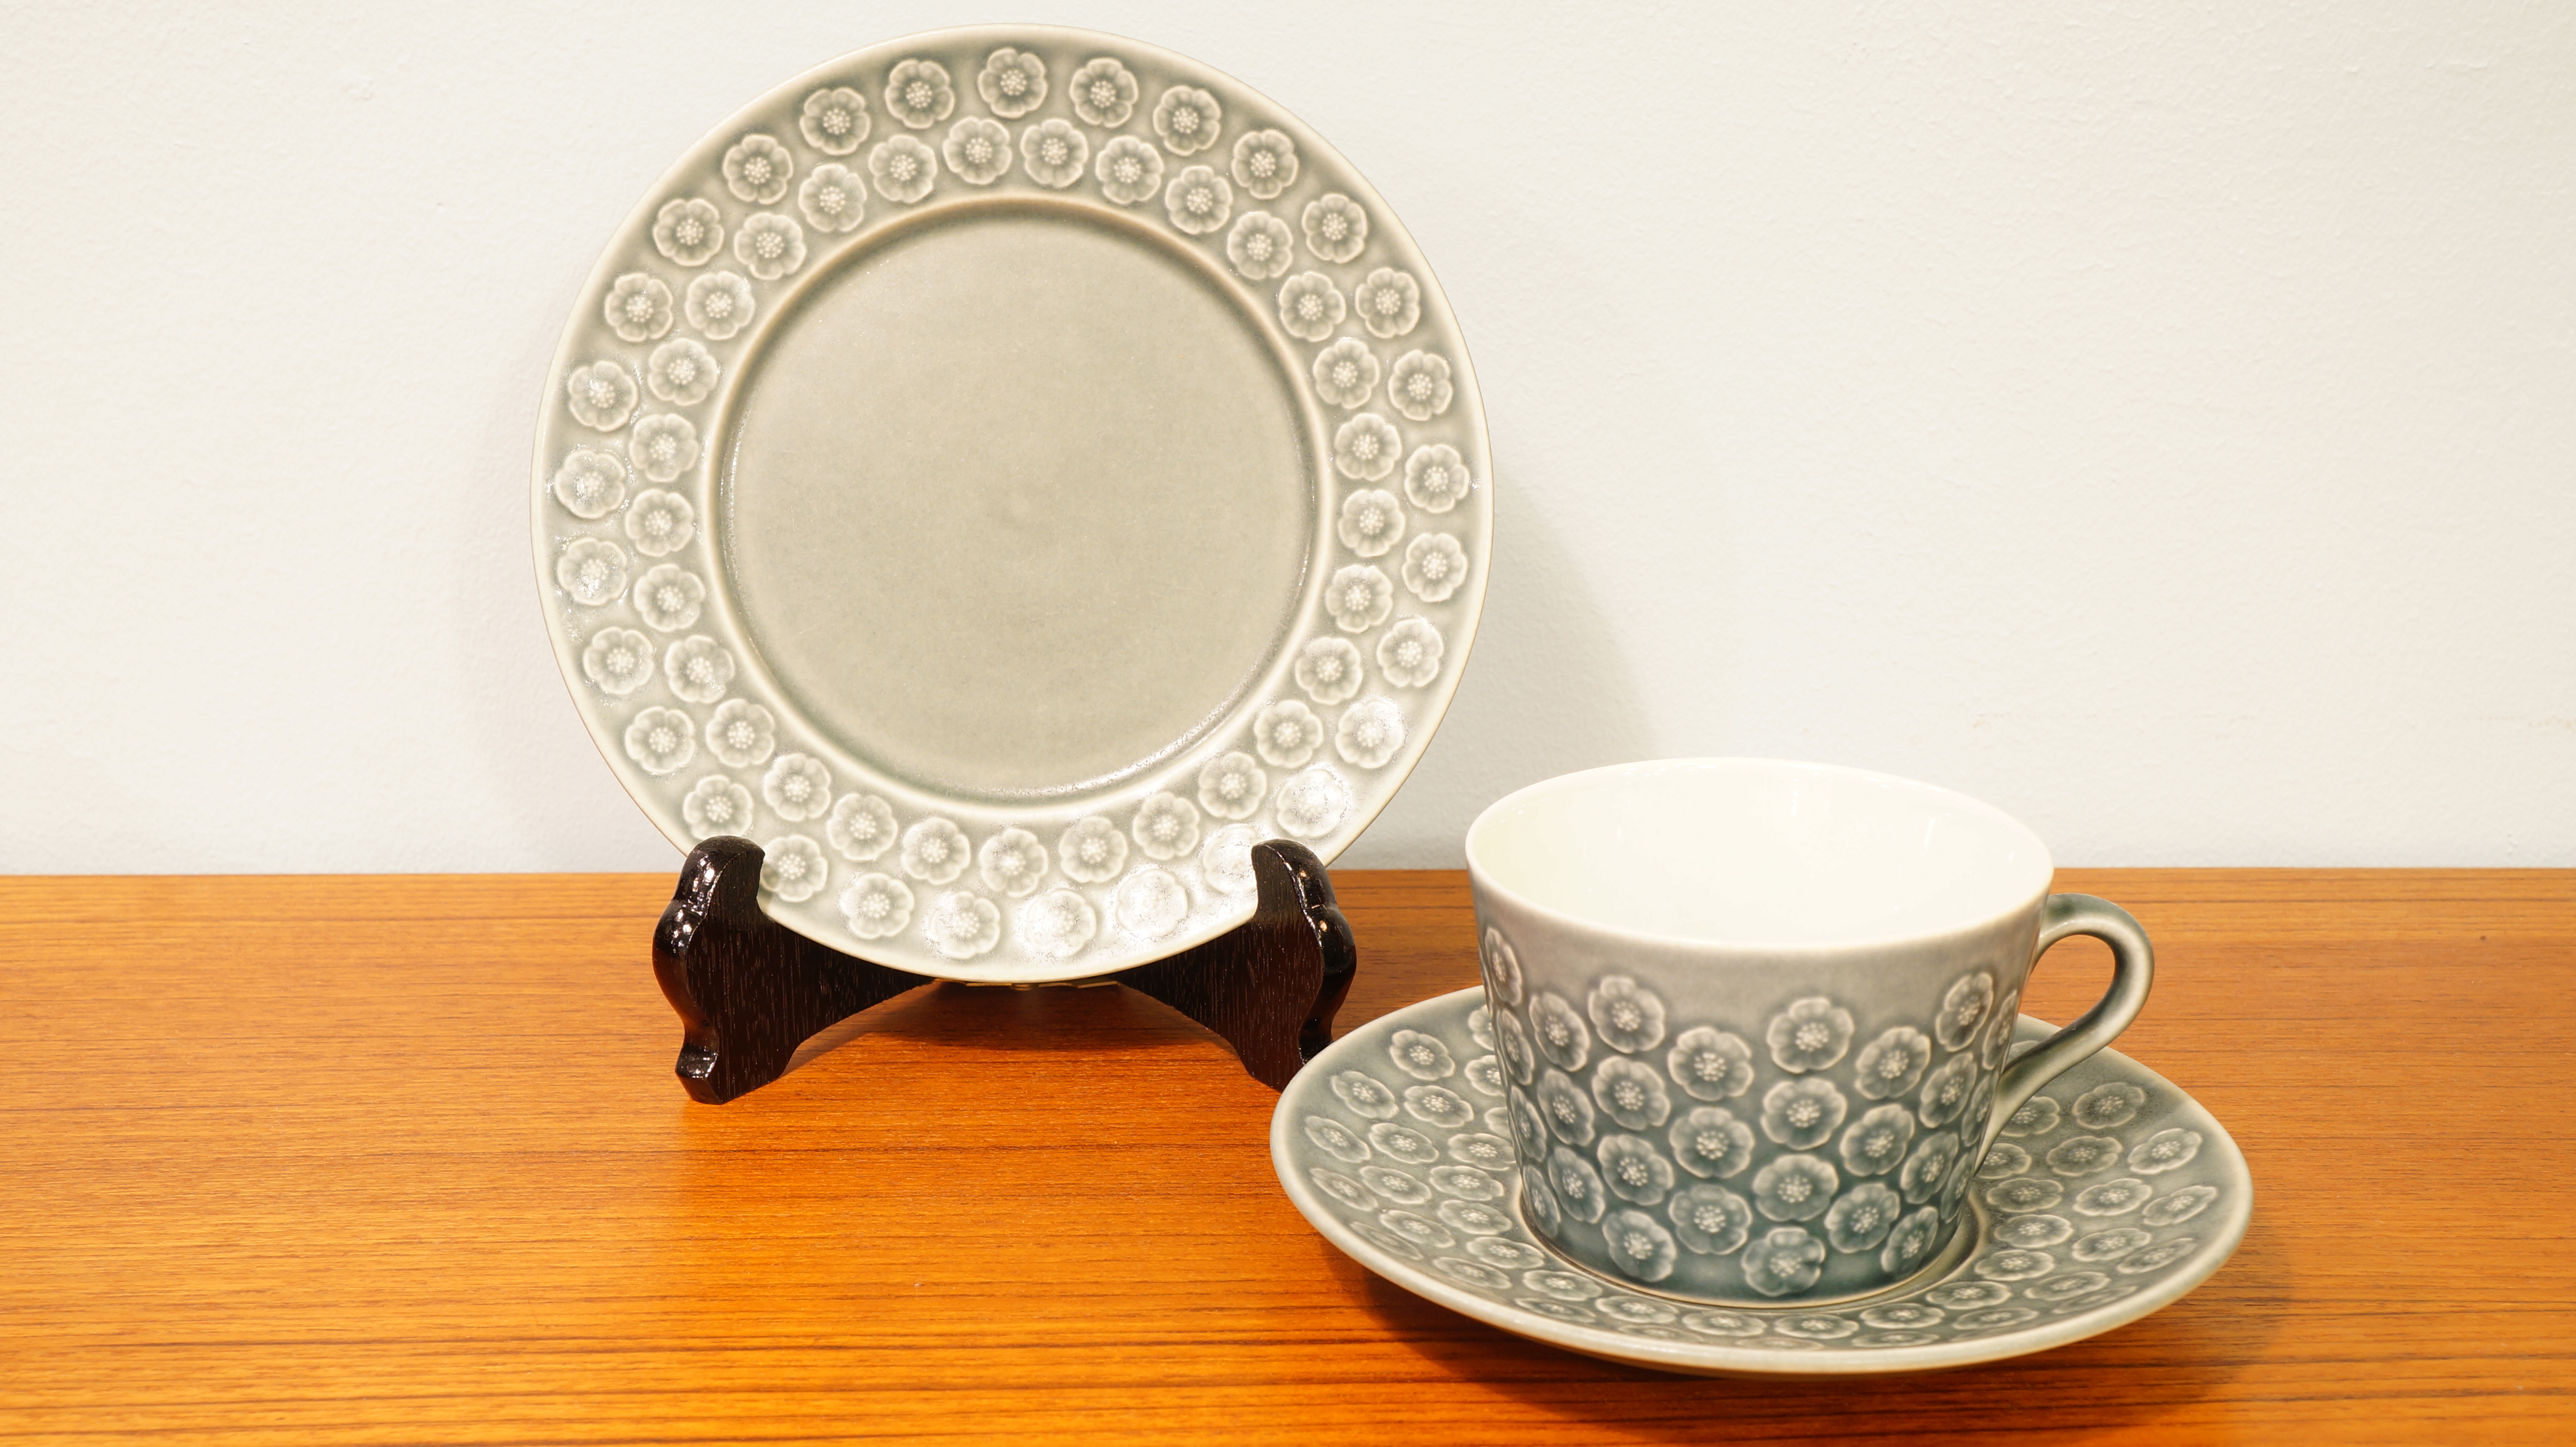 Kronjyden "Bla Azur Trio set"cup&saucer,plate/クロニーデン "ブルー アズール トリオセット"カップ＆ソーサー